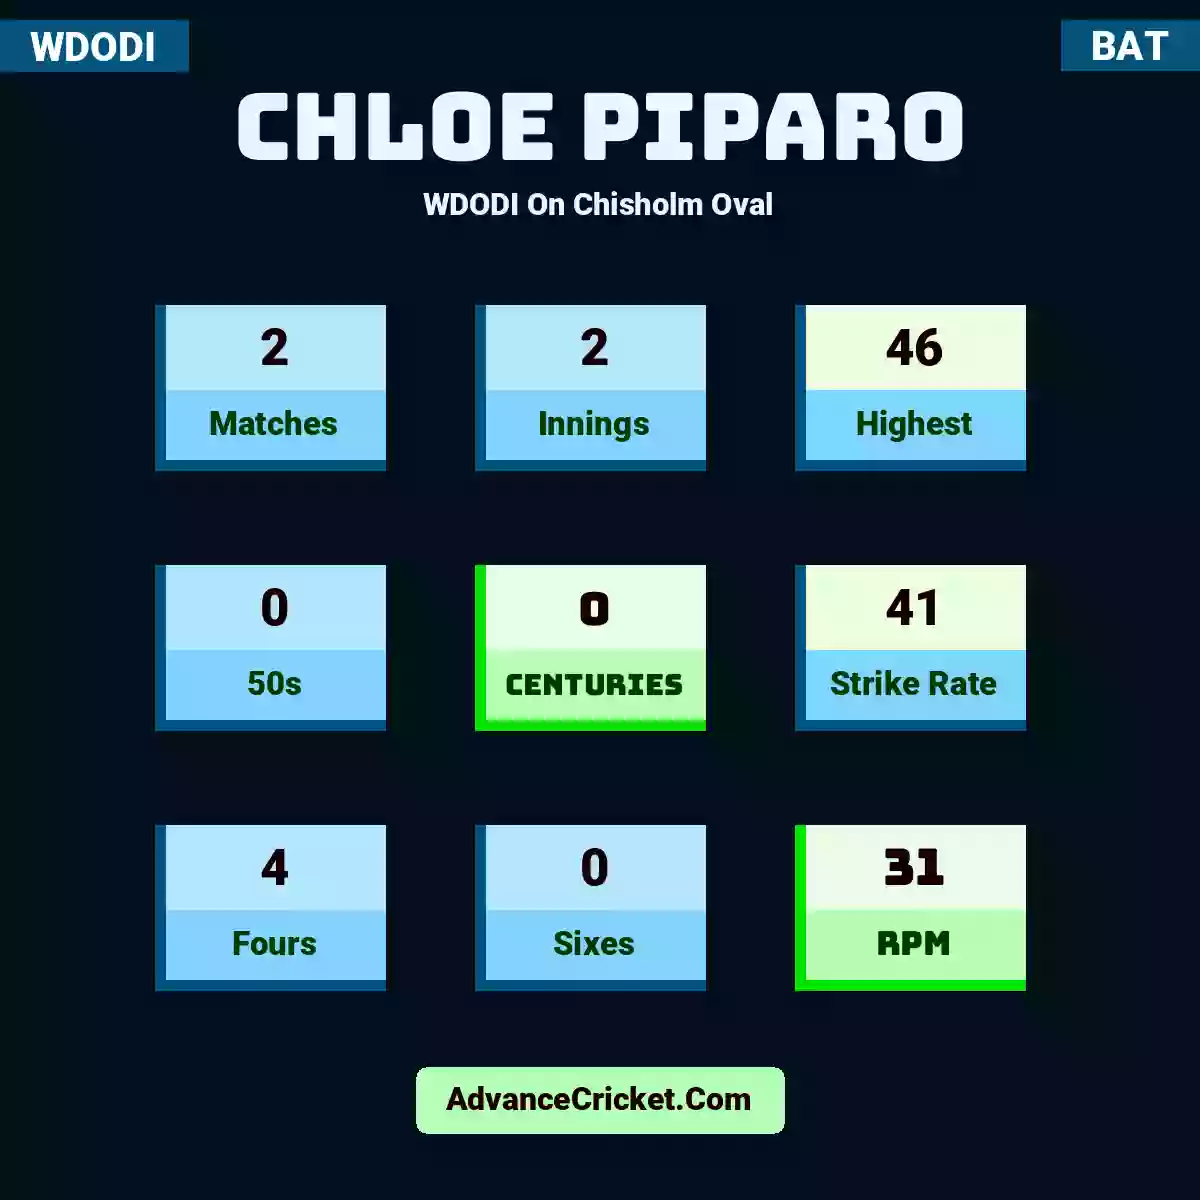 Chloe Piparo WDODI  On Chisholm Oval, Chloe Piparo played 2 matches, scored 46 runs as highest, 0 half-centuries, and 0 centuries, with a strike rate of 41. C.Piparo hit 4 fours and 0 sixes, with an RPM of 31.